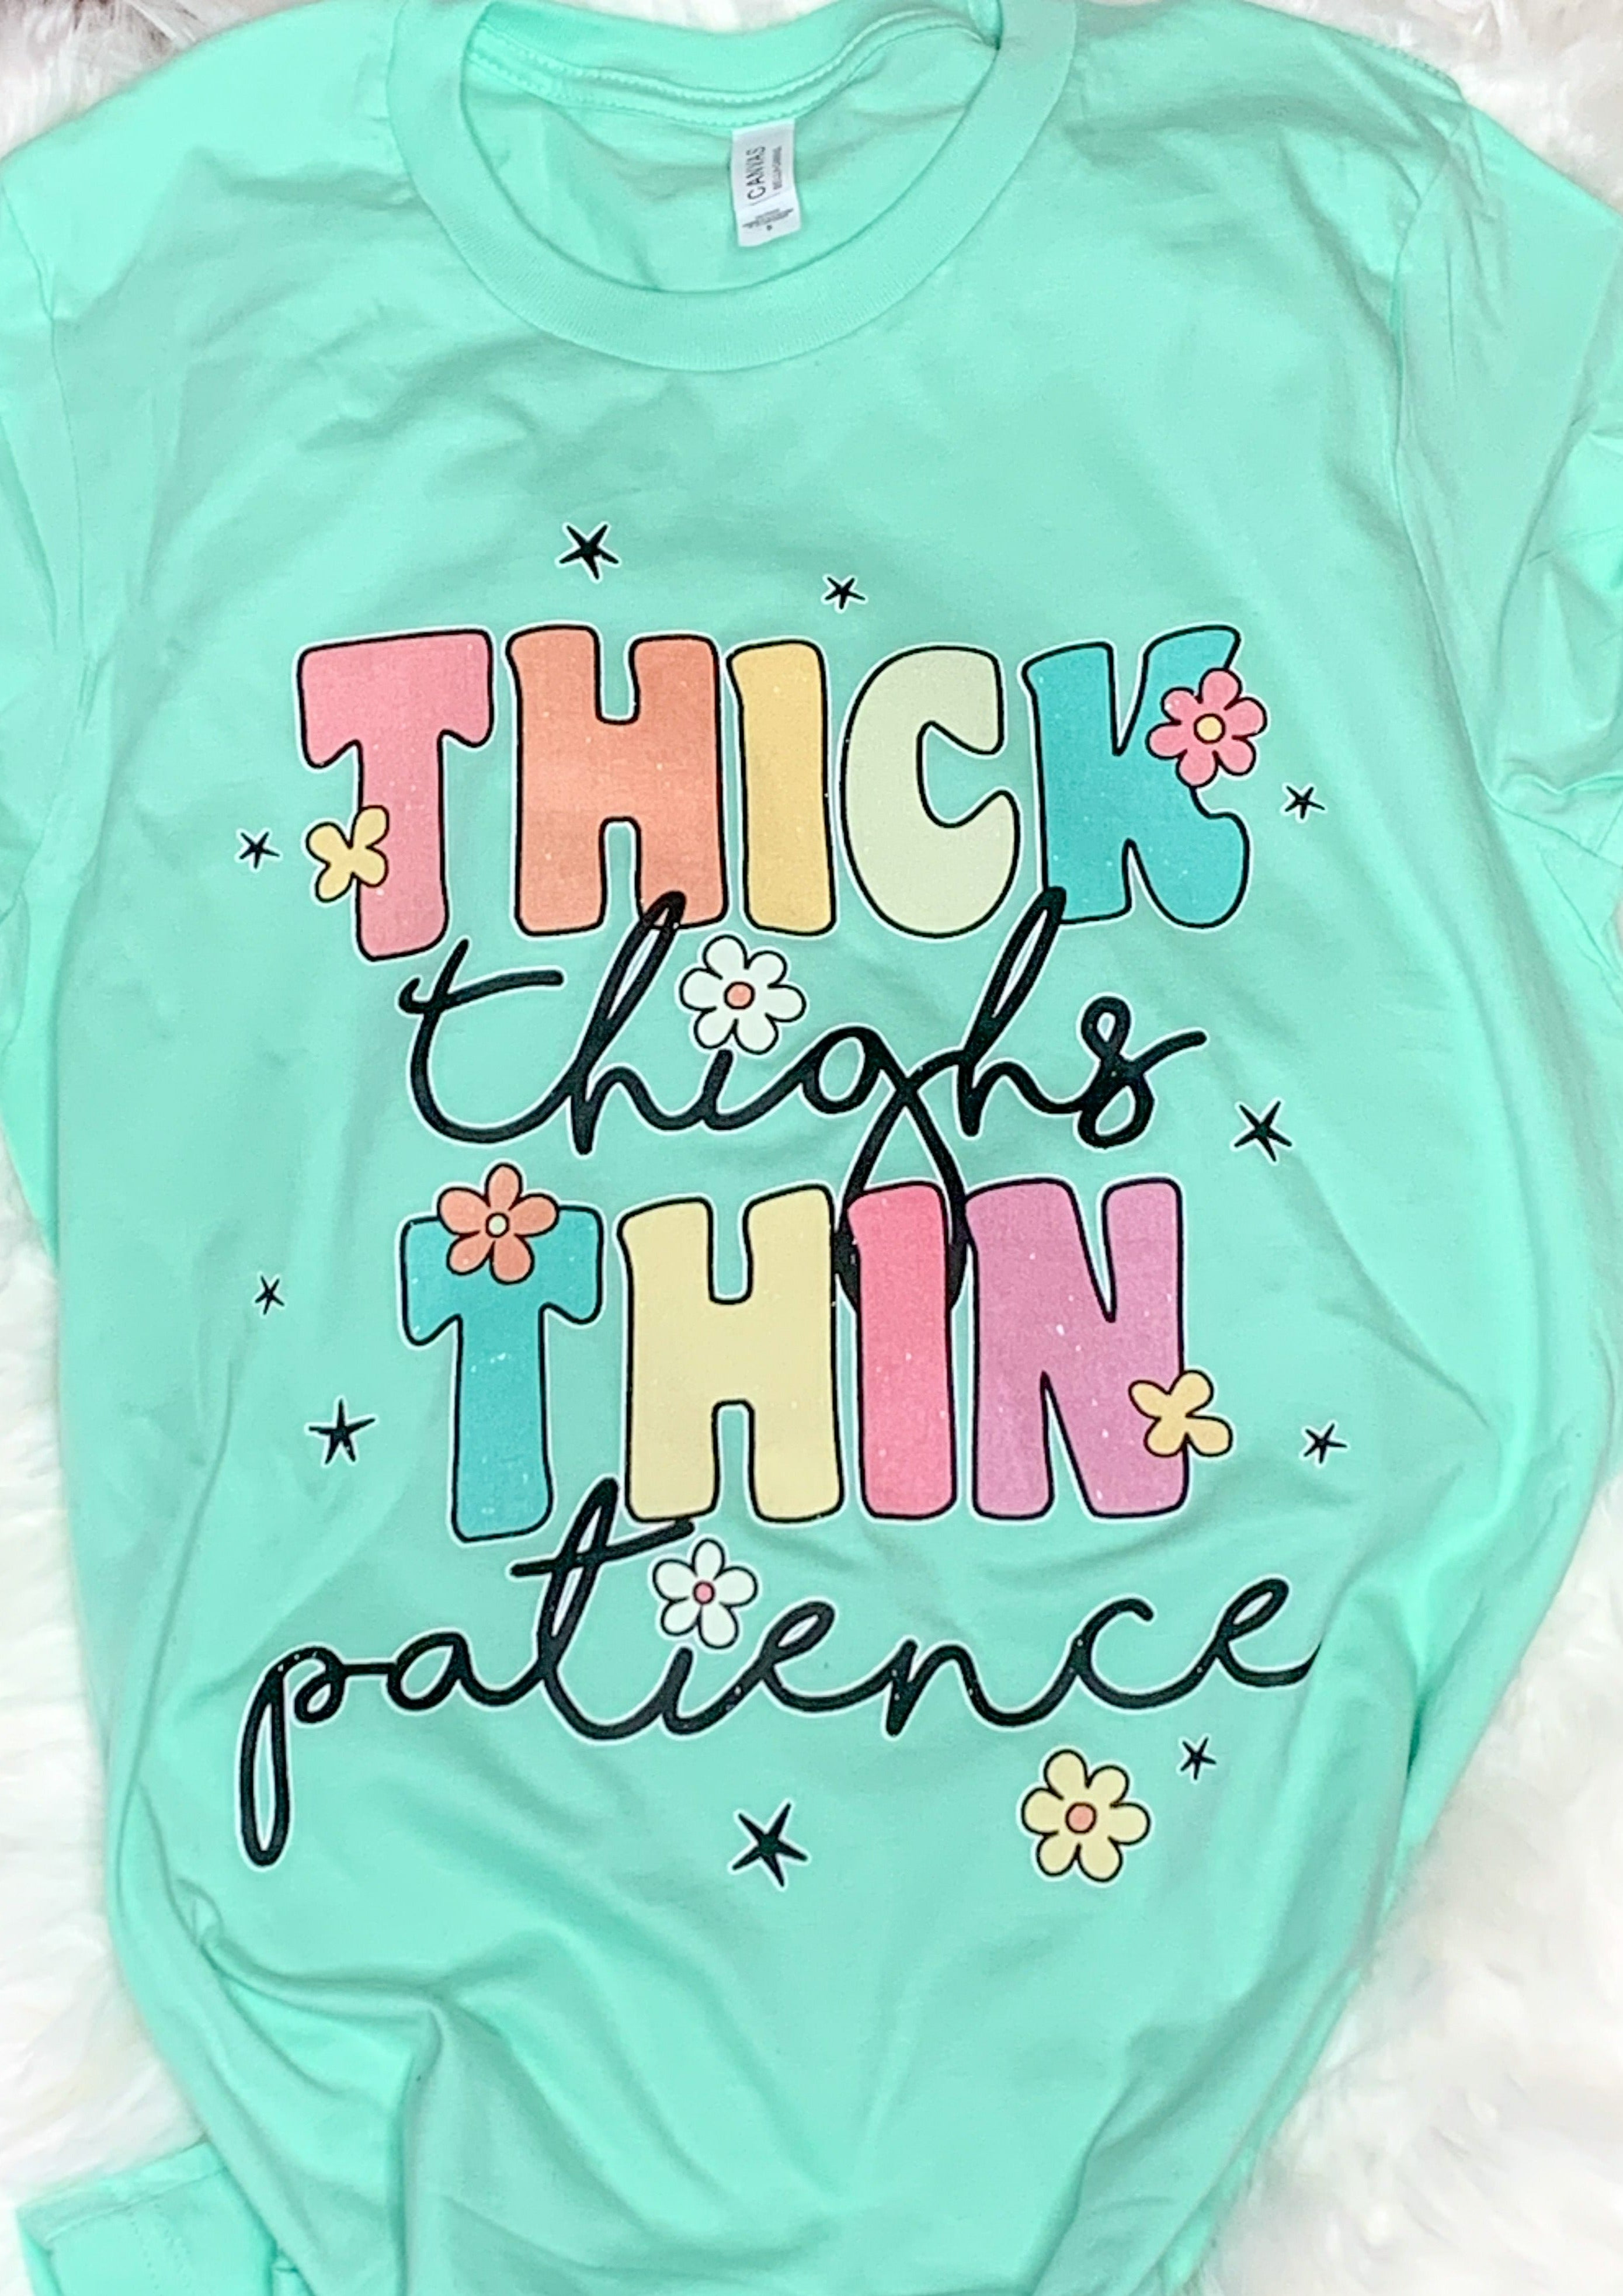 Mint green bella canvas tee with saying "thick thighs thin patience"